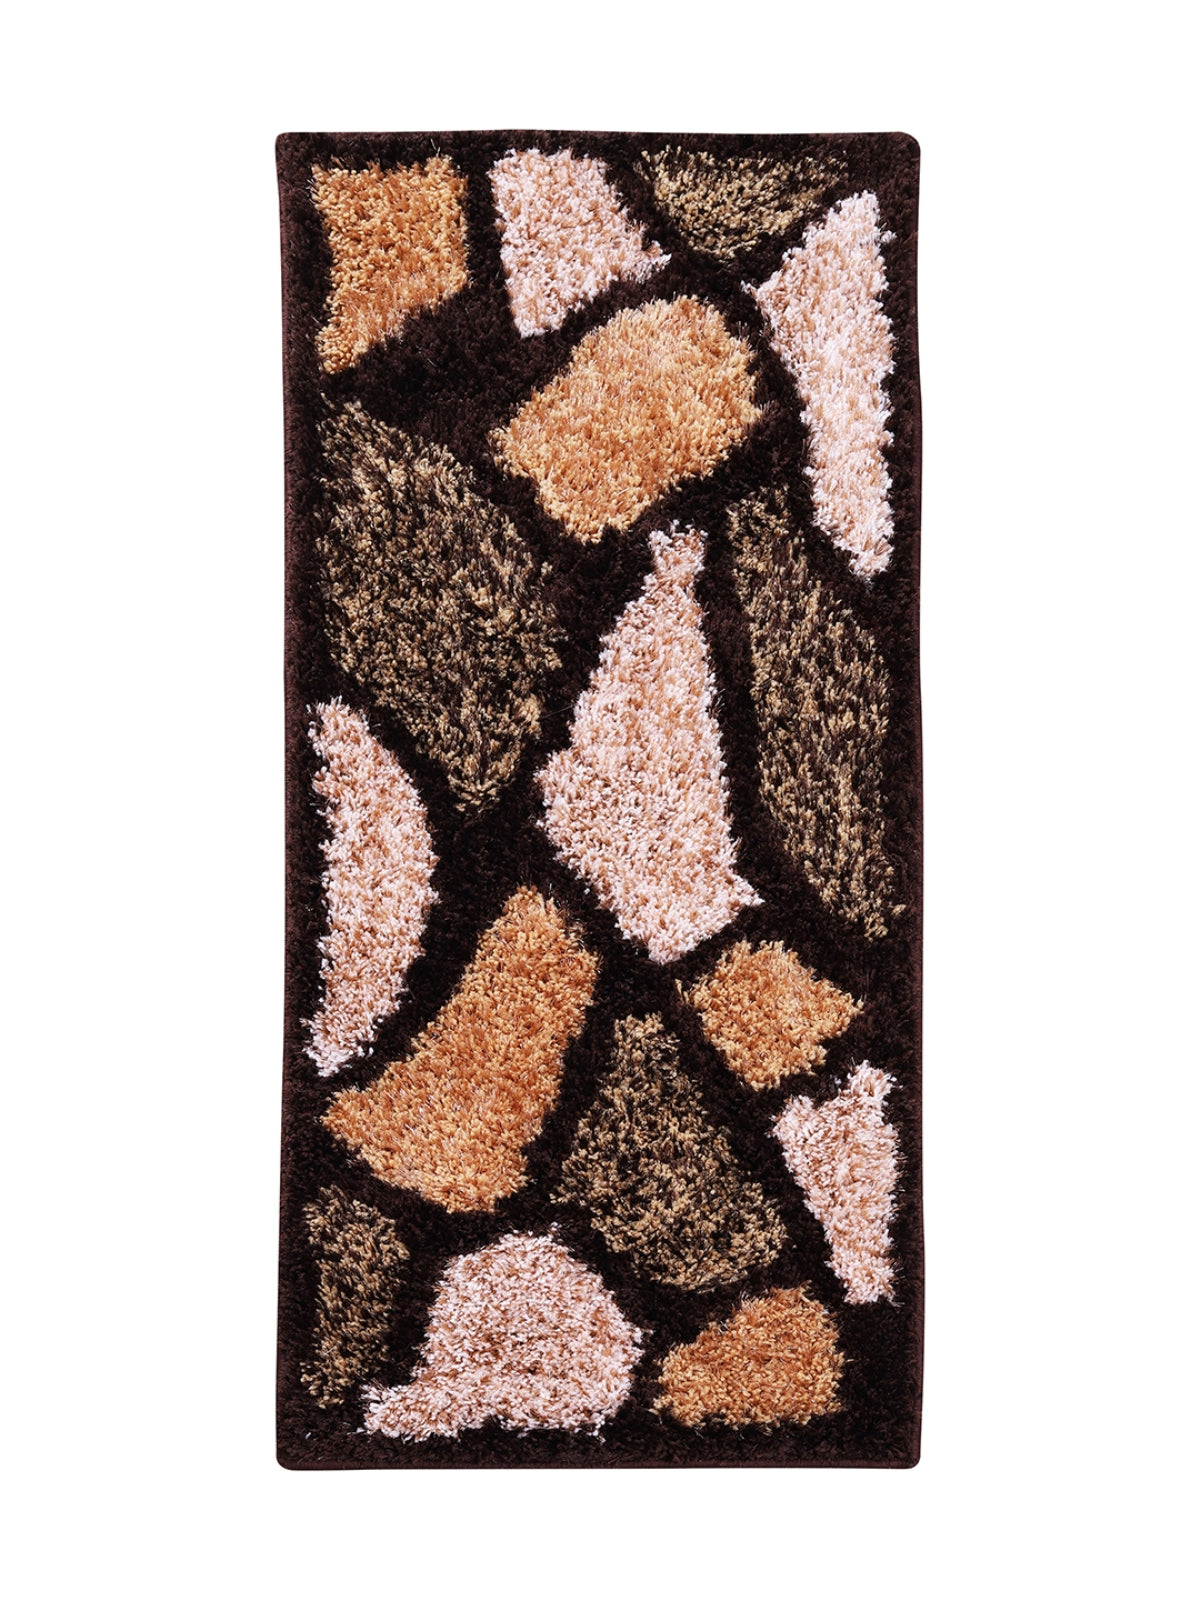 Beige & Brown 22 inch x 55 inch Abstract Patterned Bed Runner